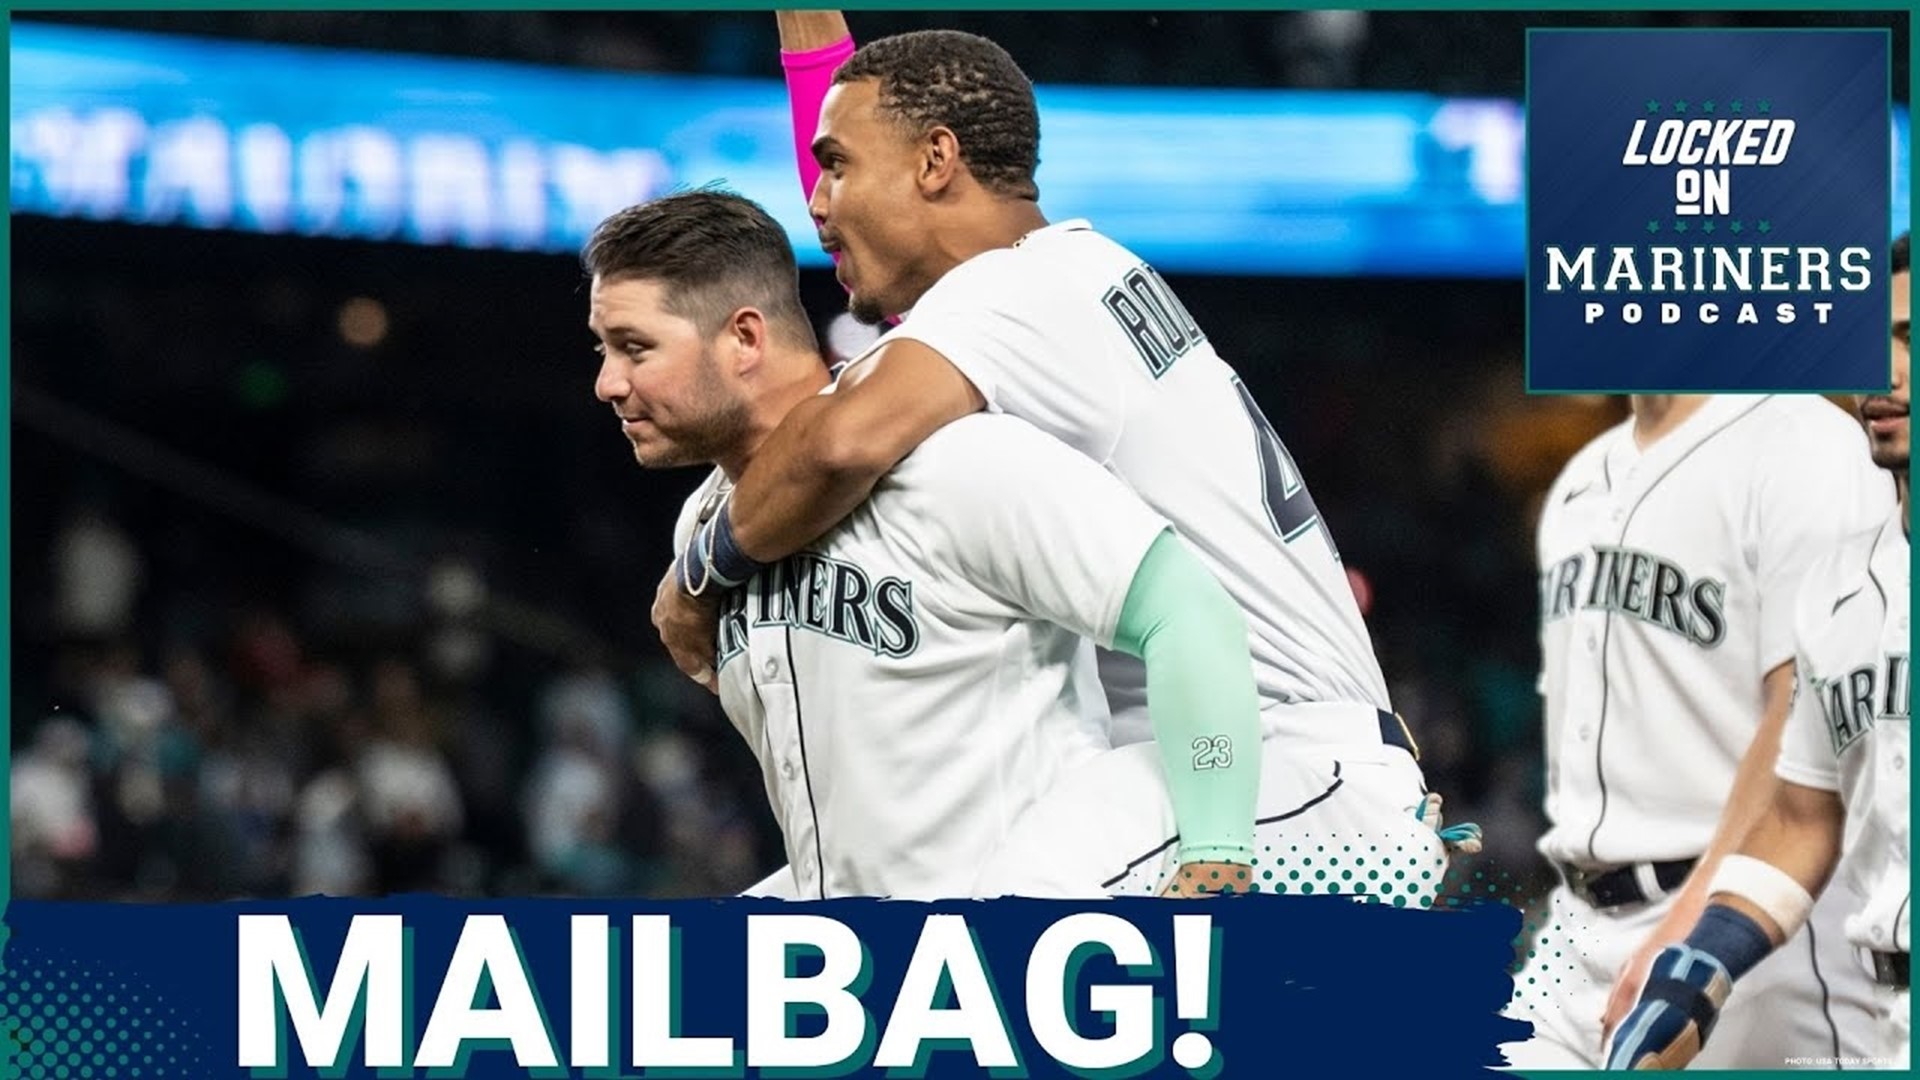 After a big-time win against the New York Yankees to secure a 7-3 homestand, Colby and Ty open up the Mariners Mailbag to answer some of their listeners' questions.